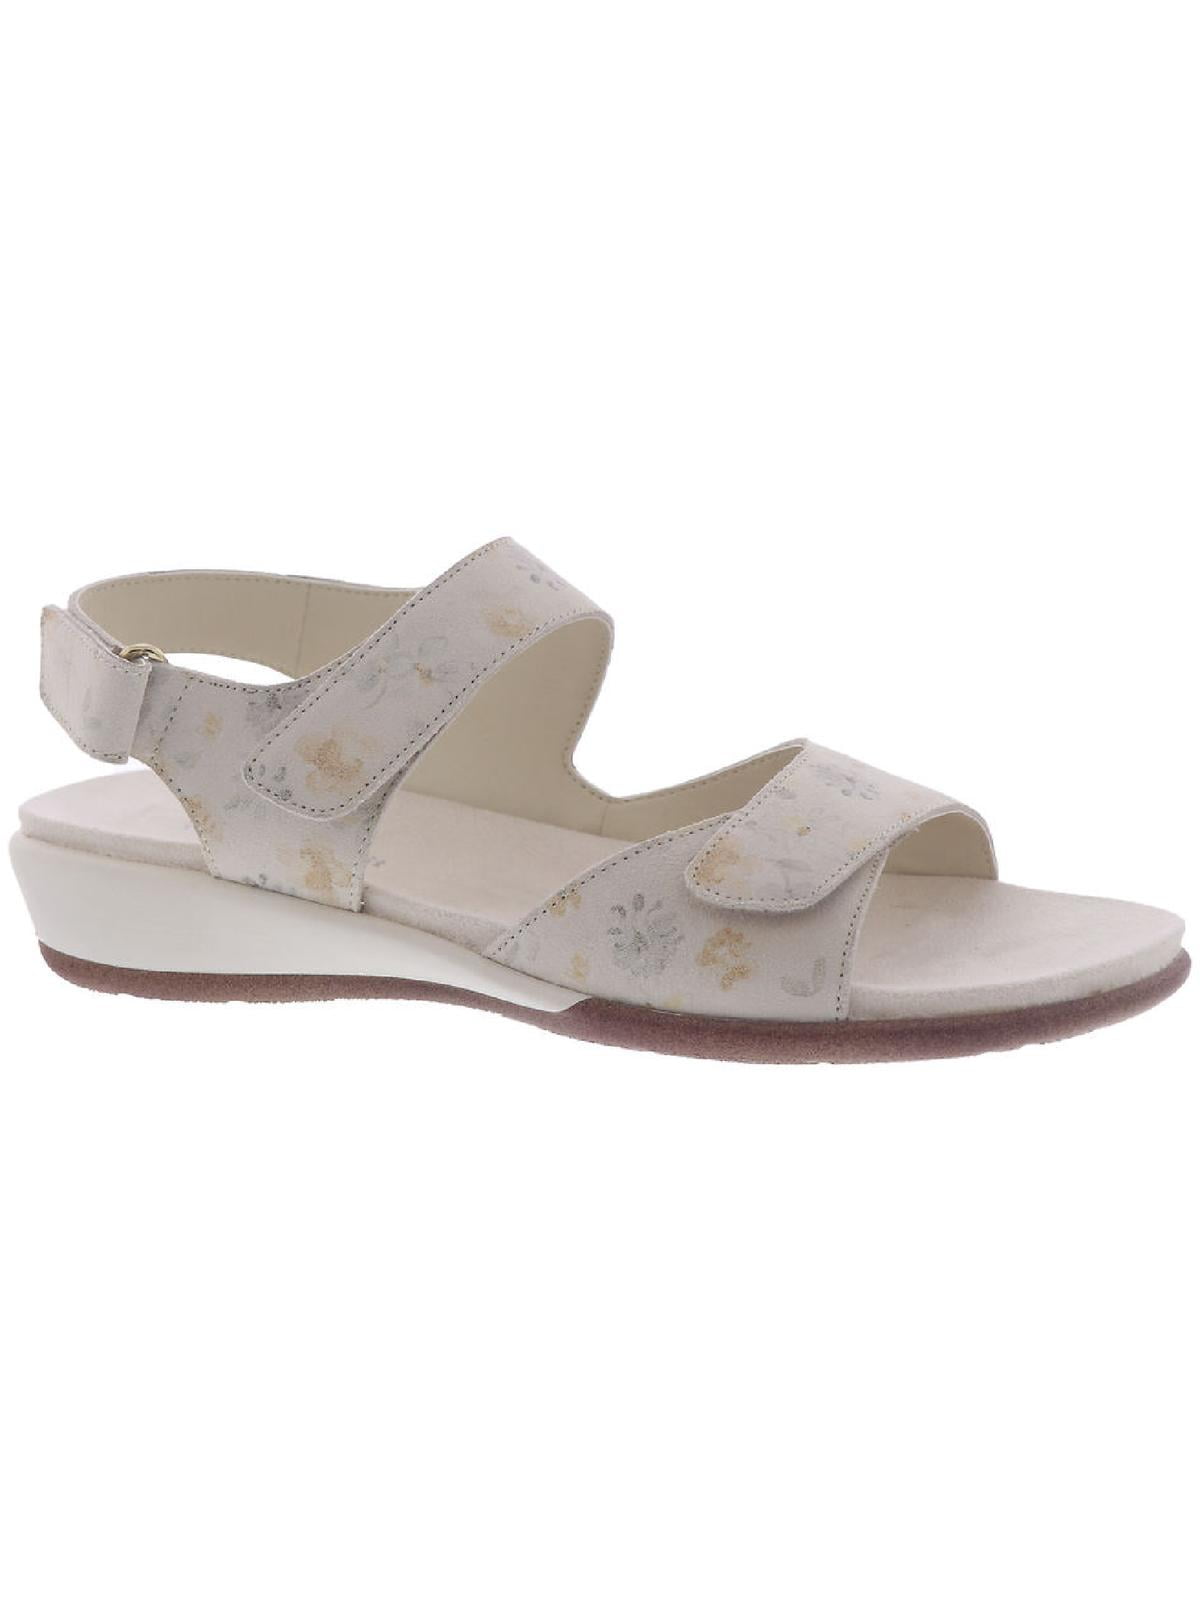 Easy Spirit Womens Hartwell Suede Ankle Strap Wedge Sandals - Walmart.com